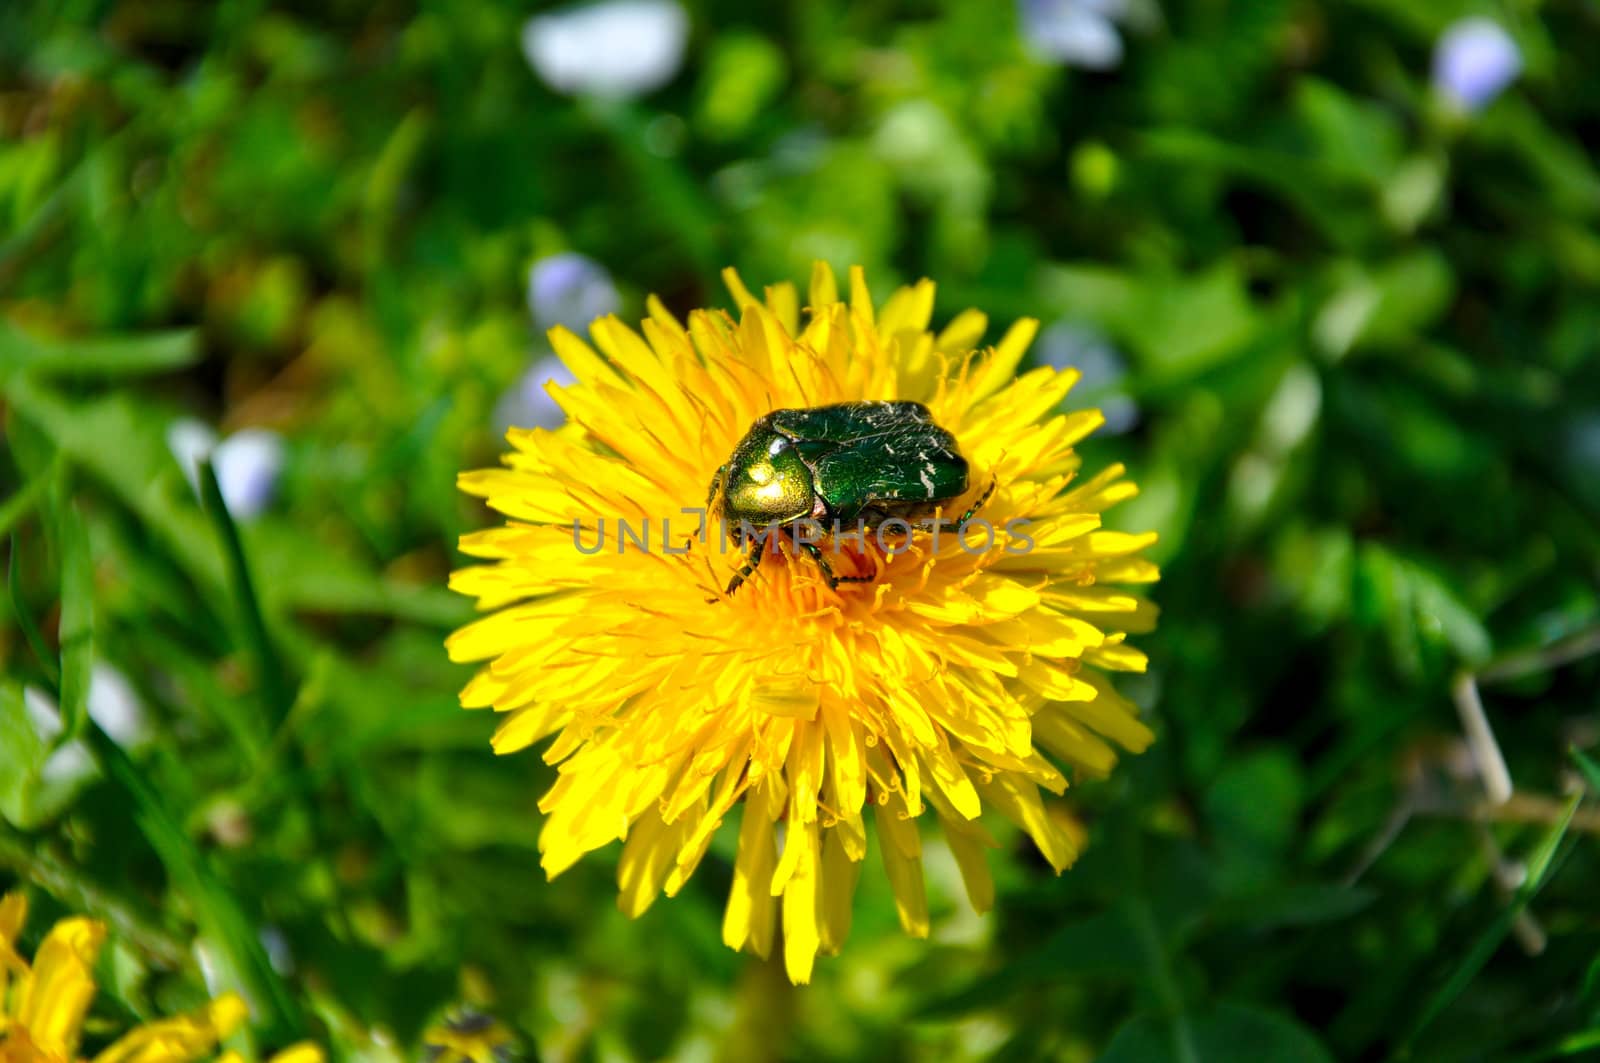 Green rose chafer (Cetonia aurata) by vintrom